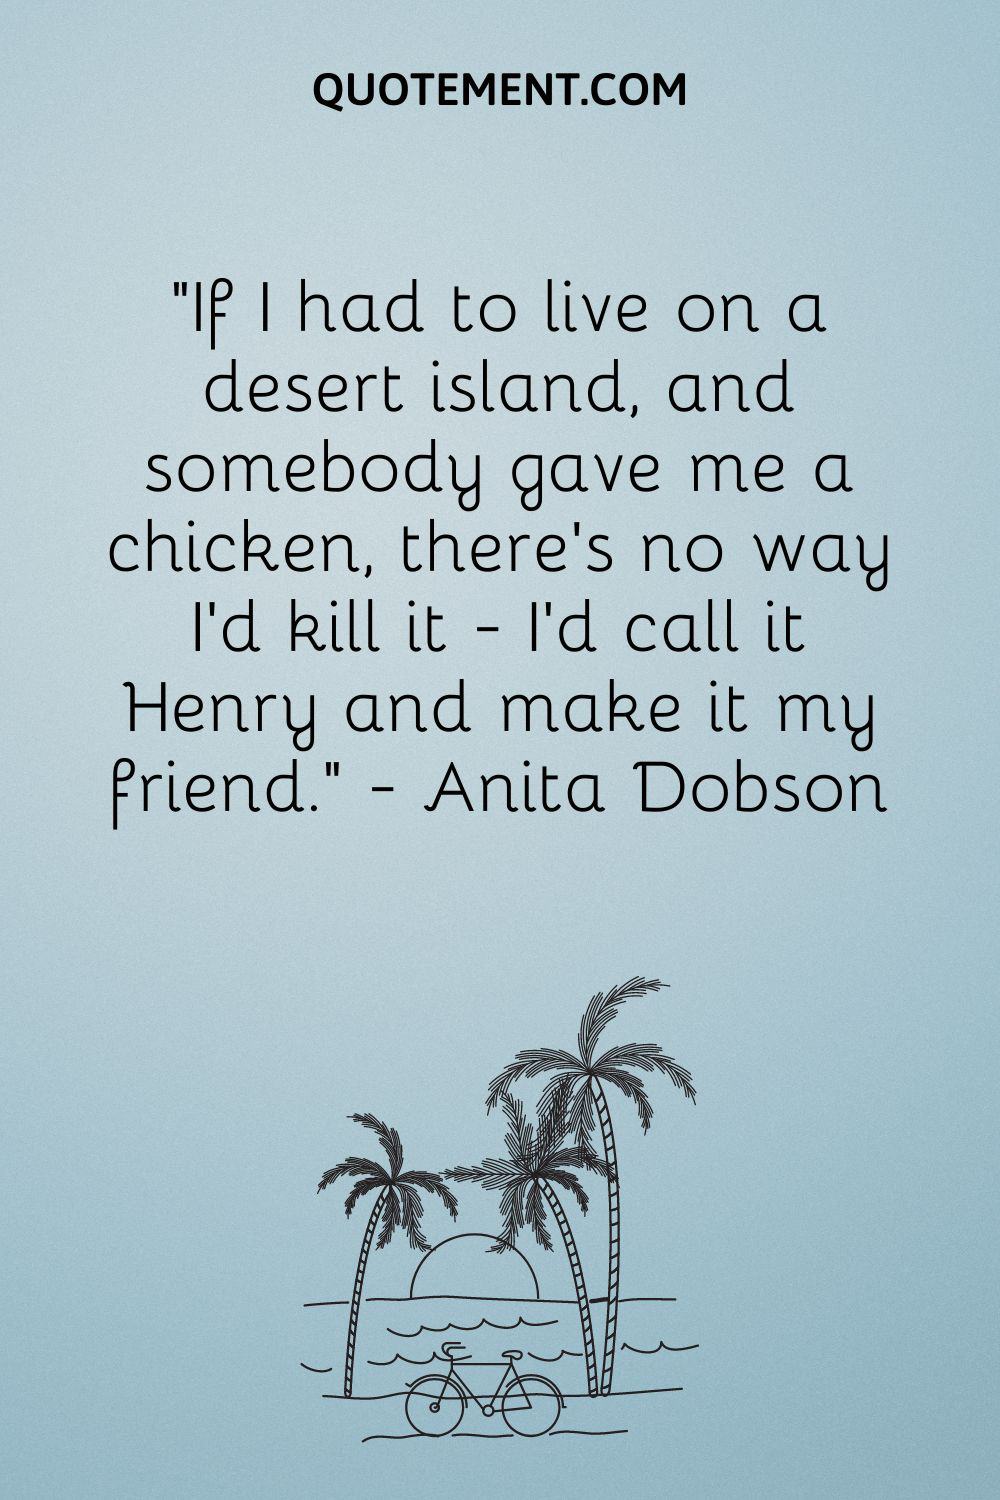 “If I had to live on a desert island, and somebody gave me a chicken, there's no way I'd kill it - I'd call it Henry and make it my friend.” — Anita Dobson